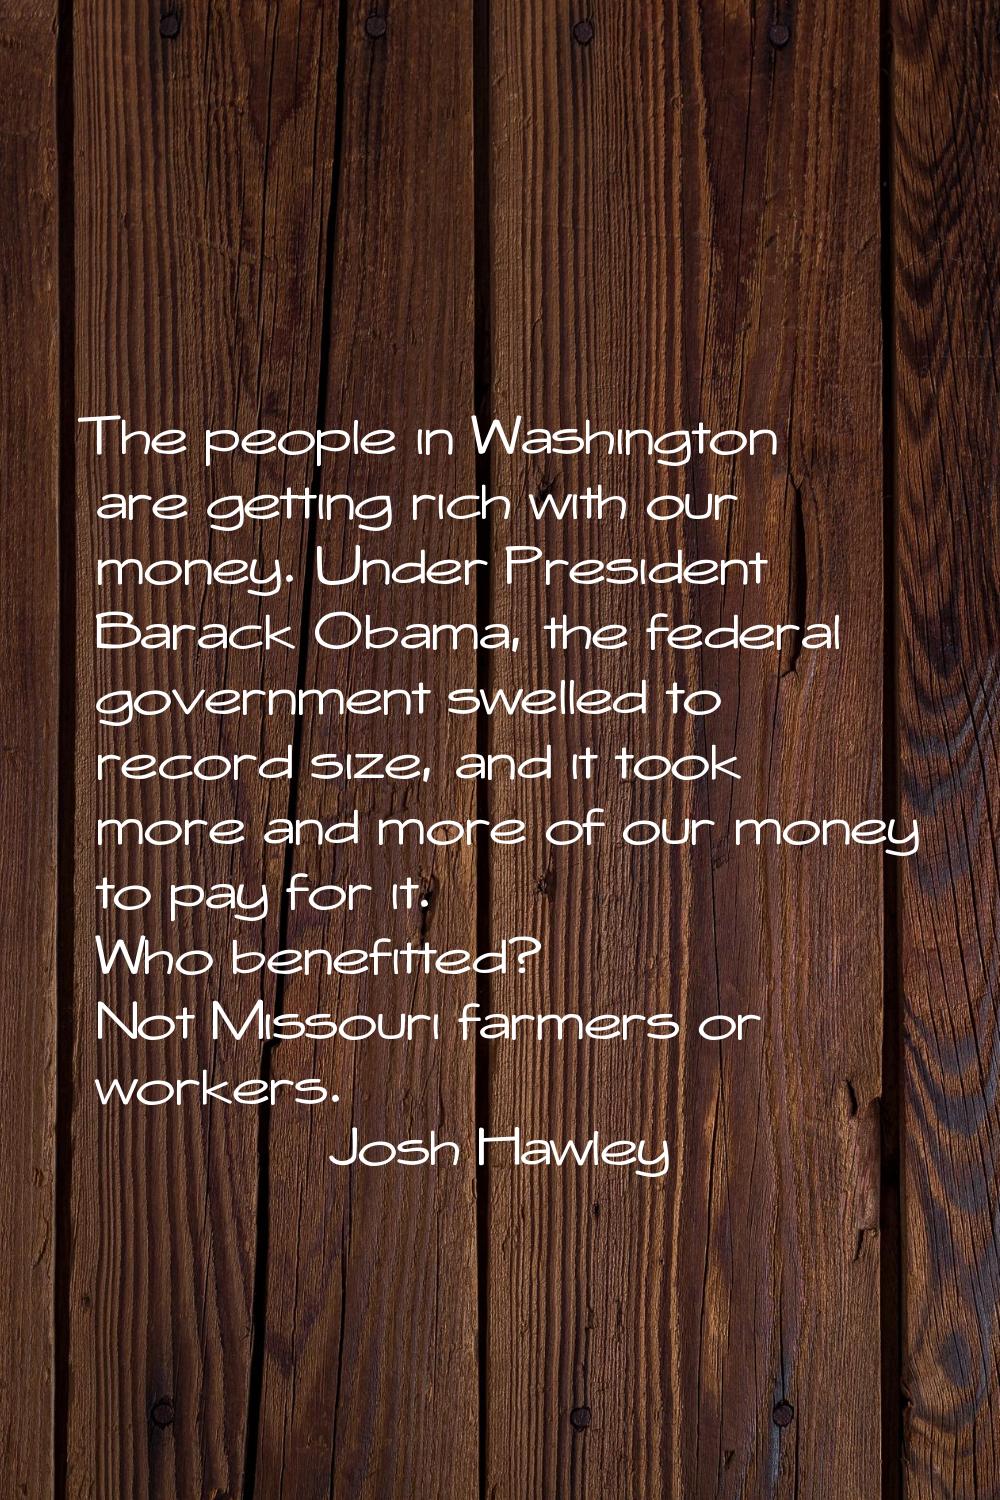 The people in Washington are getting rich with our money. Under President Barack Obama, the federal